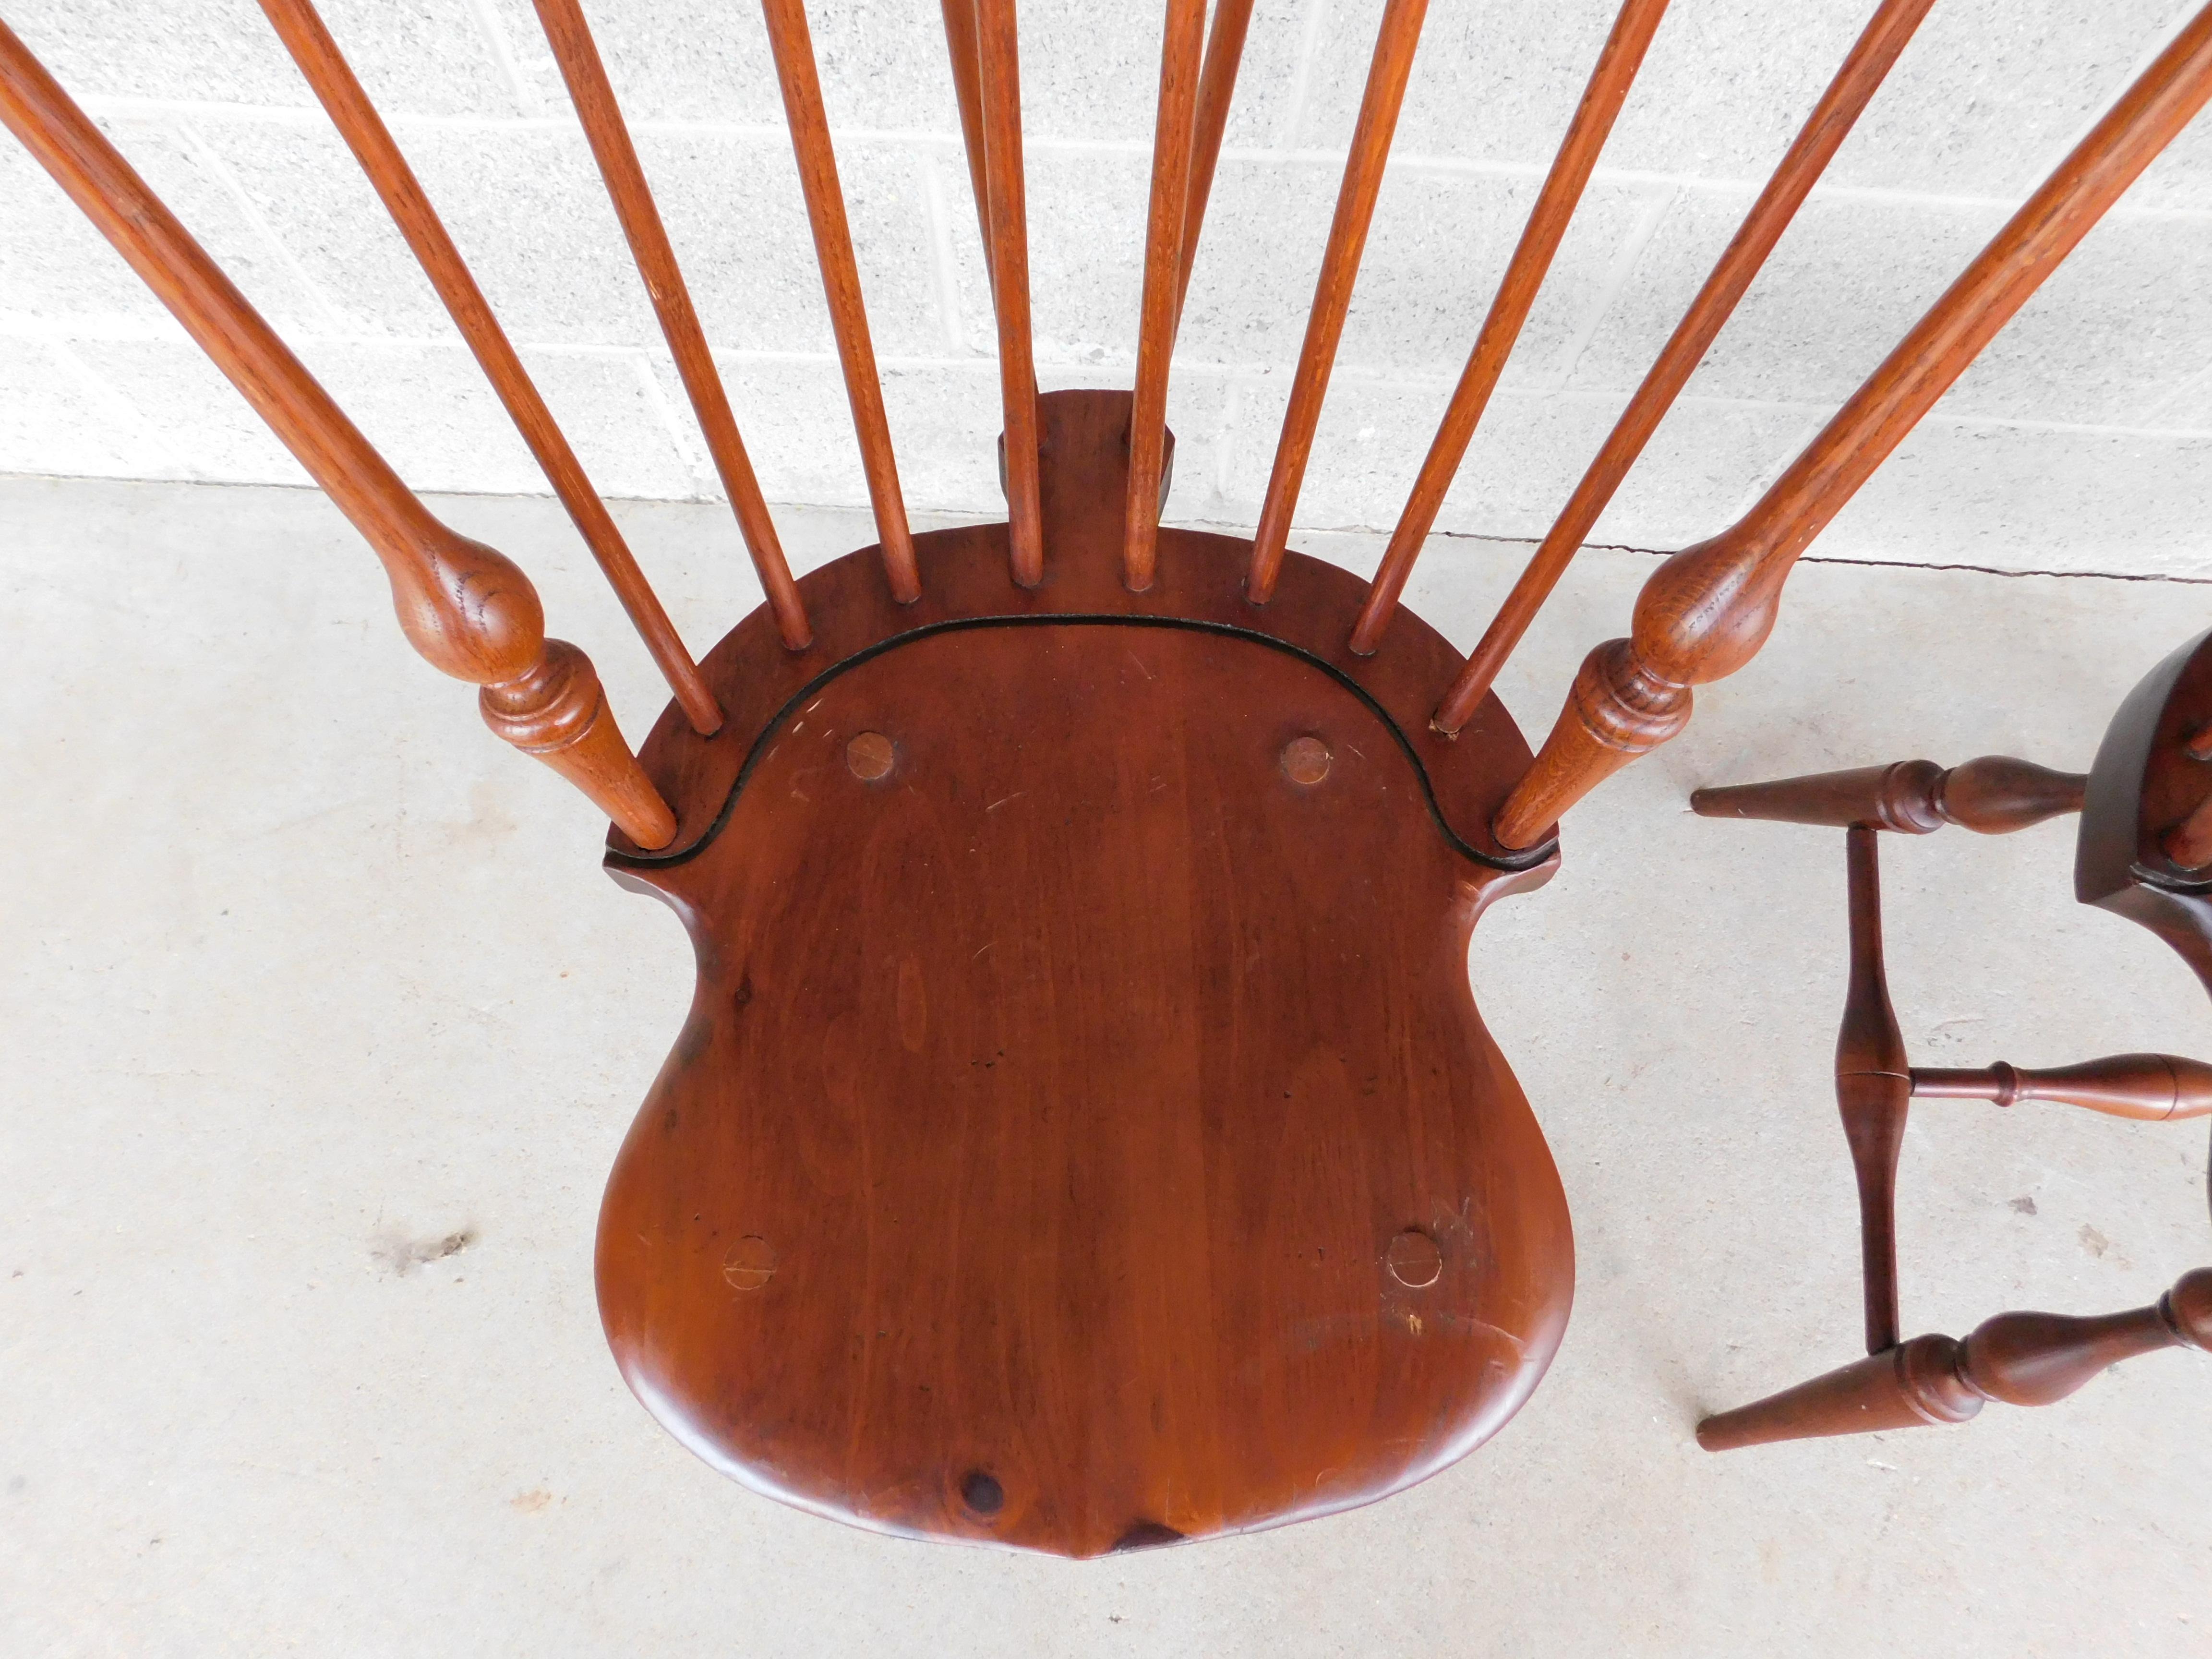 Windsor Fan Back Brace Back Side Chairs by Tubb - Set of 4

Hand Made, Pine Seat Bottoms, Hardwoods used for the Fan Back and Turned Legs

Original Finish, Good Sturdy Condition, Natural Age Marks on the Seats Bottoms, Normal Small Scuffs on the